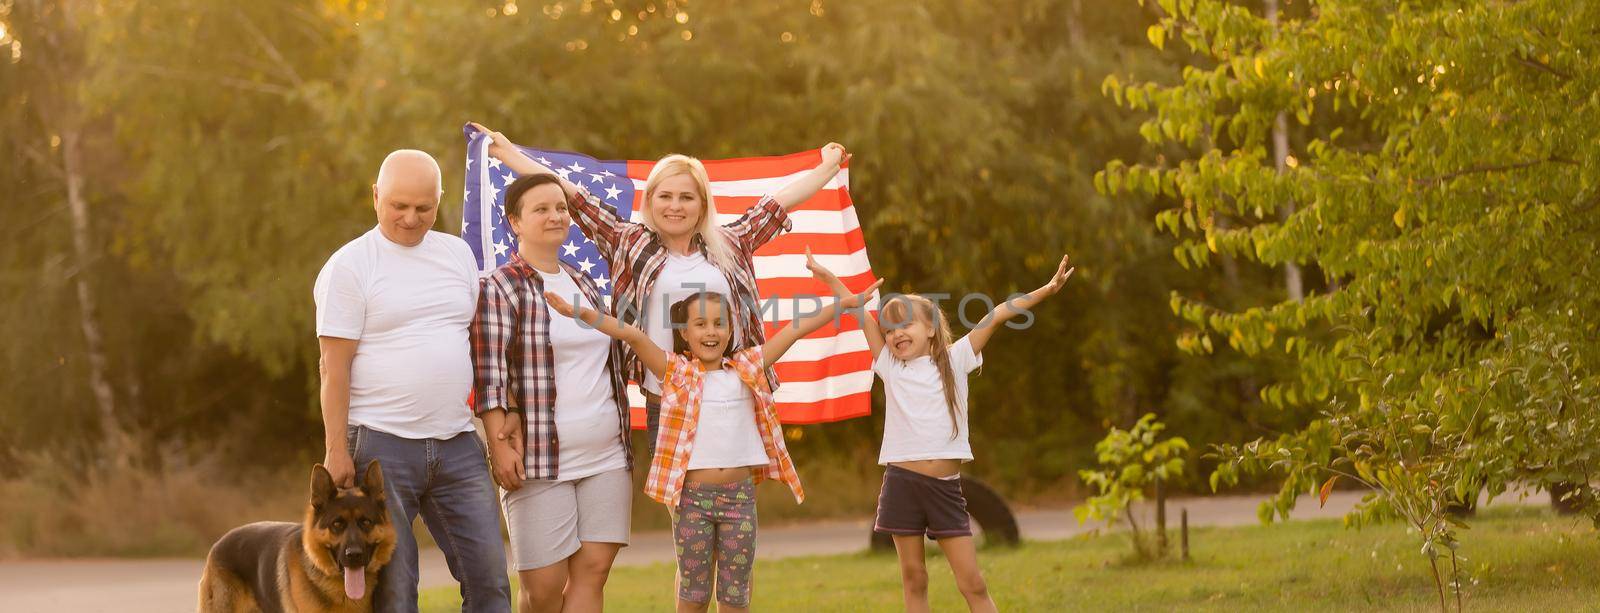 Family Posing Outdoors With American Flag by Andelov13